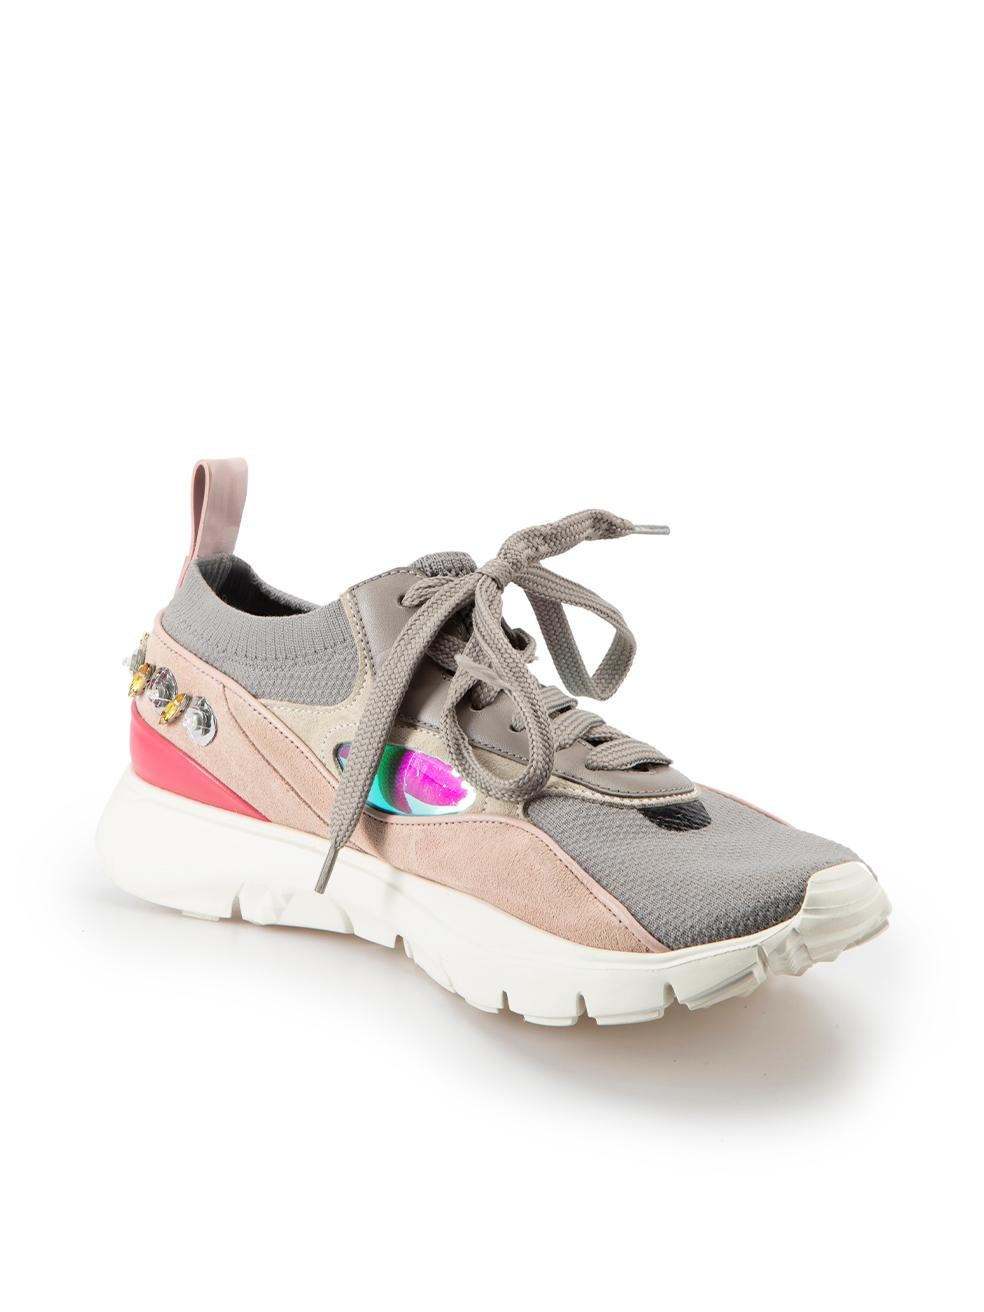 CONDITION is Very good. Minimal wear to shoes is evident. Minimal wear to the suede panels on both shoes with minor discolouration on this used Valentino designer resale item.



Details


Grey

Suede and cloth

Trainers

Knitted grey panels

Pink